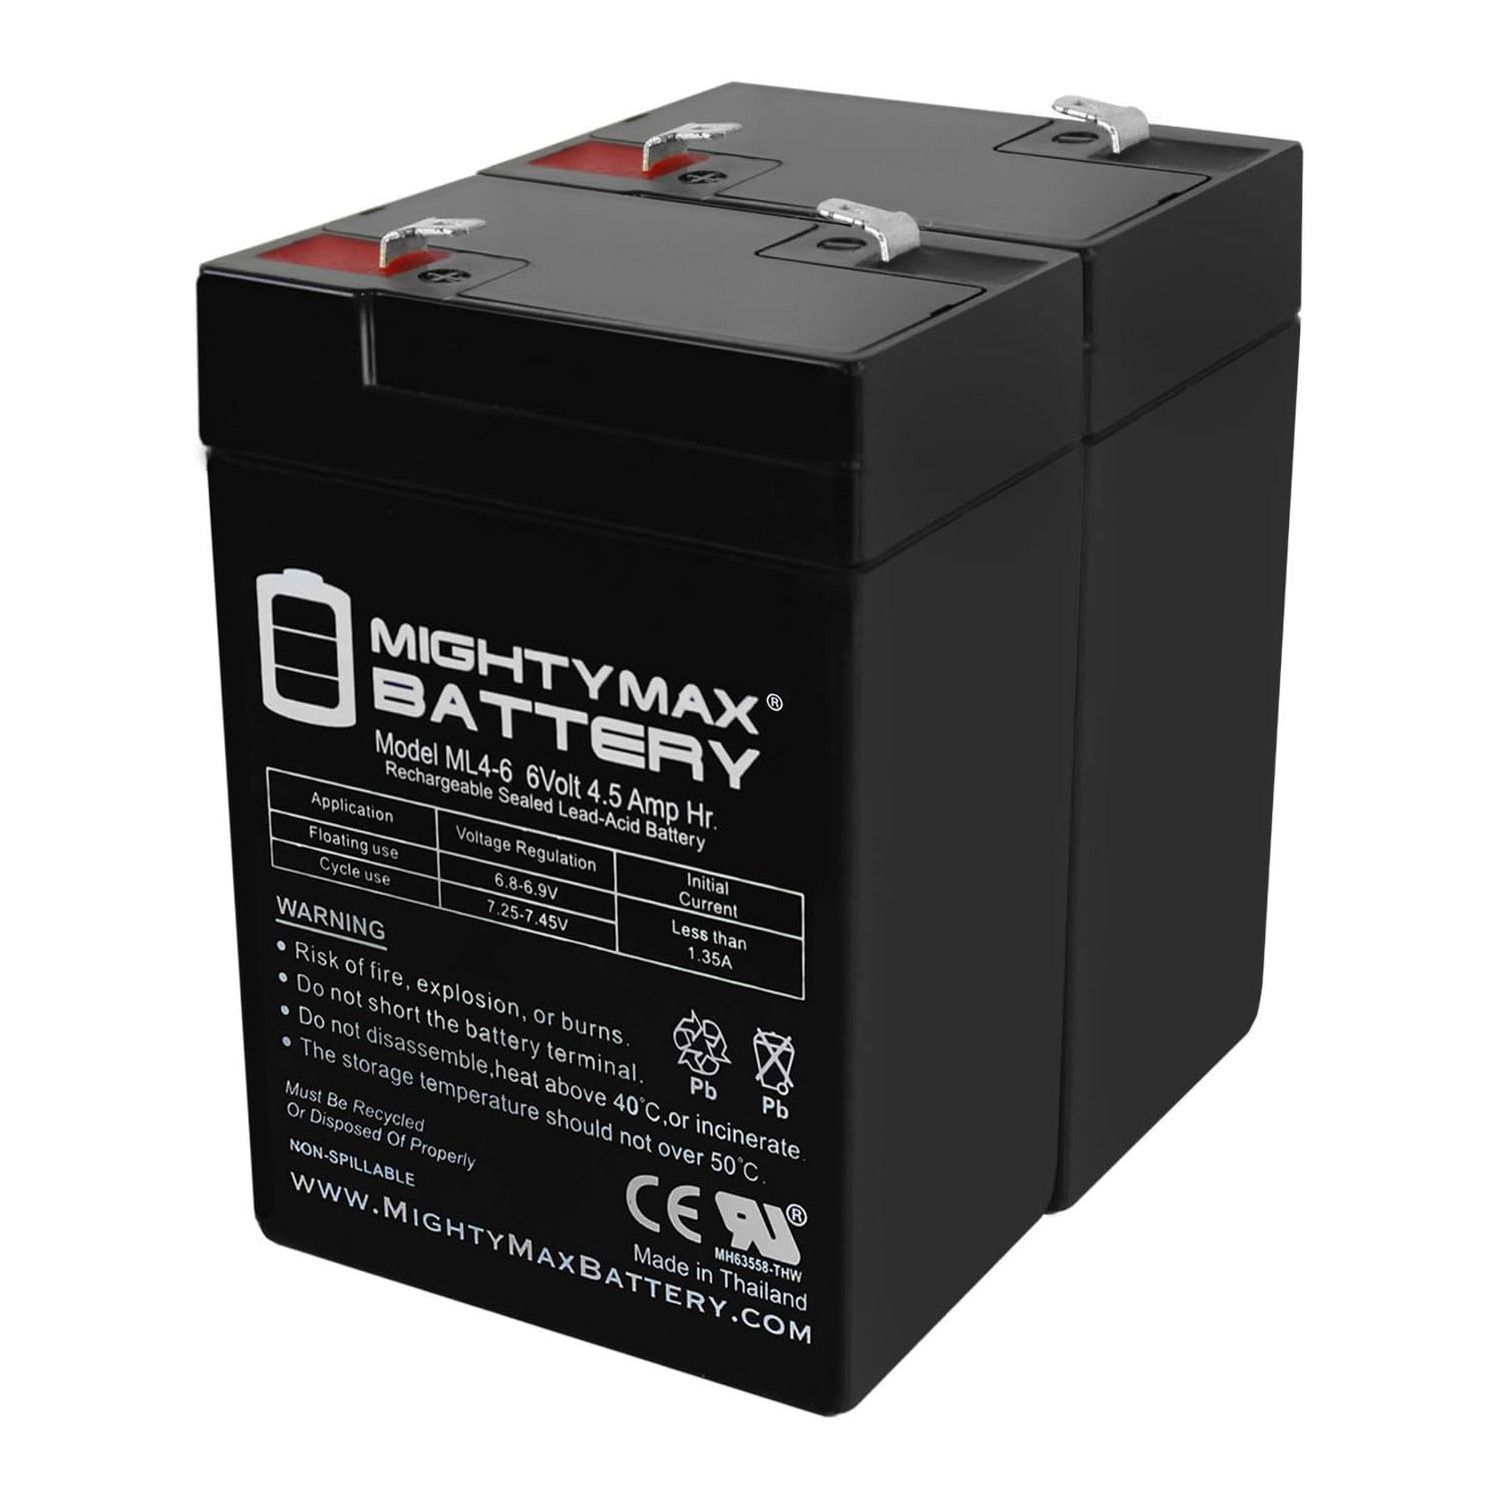 6V 4.5AH SLA Replacement Battery for Big Beam 2CL6S5 - 2 Pack